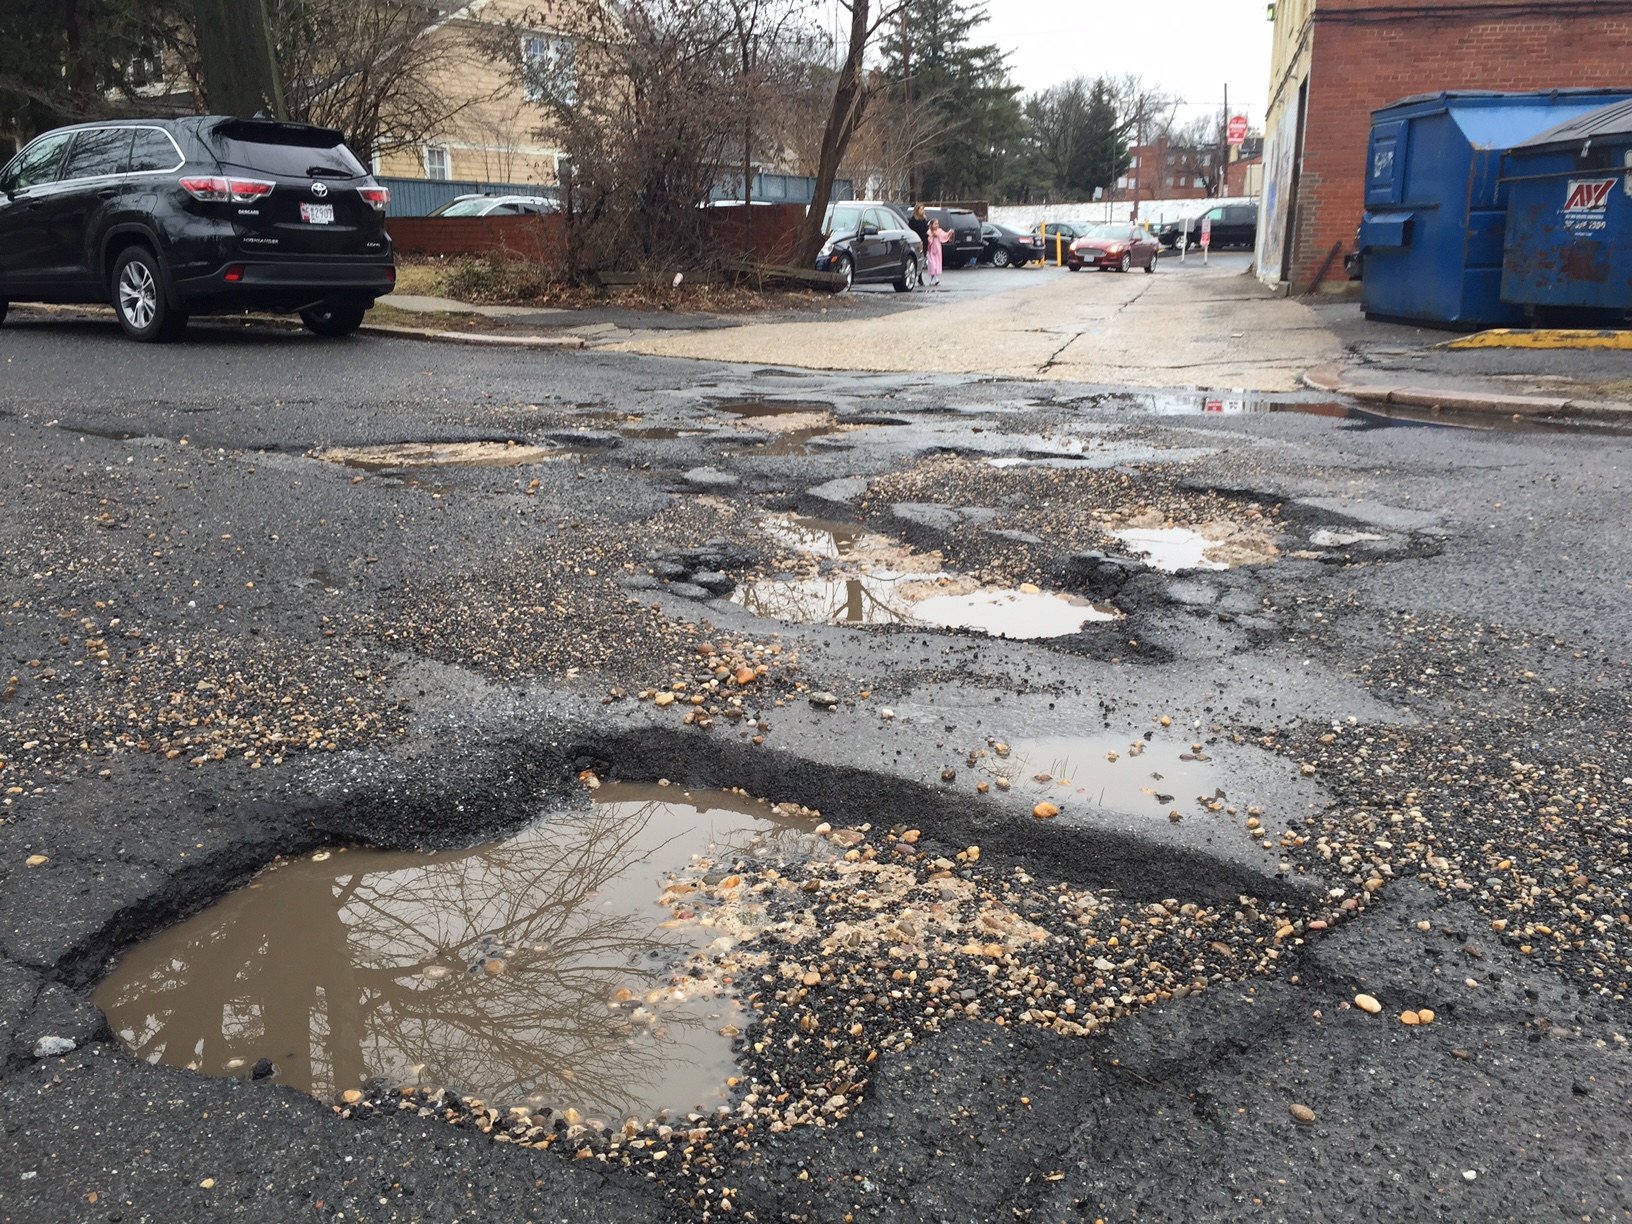 Potholes could cost billions in damage nationwide